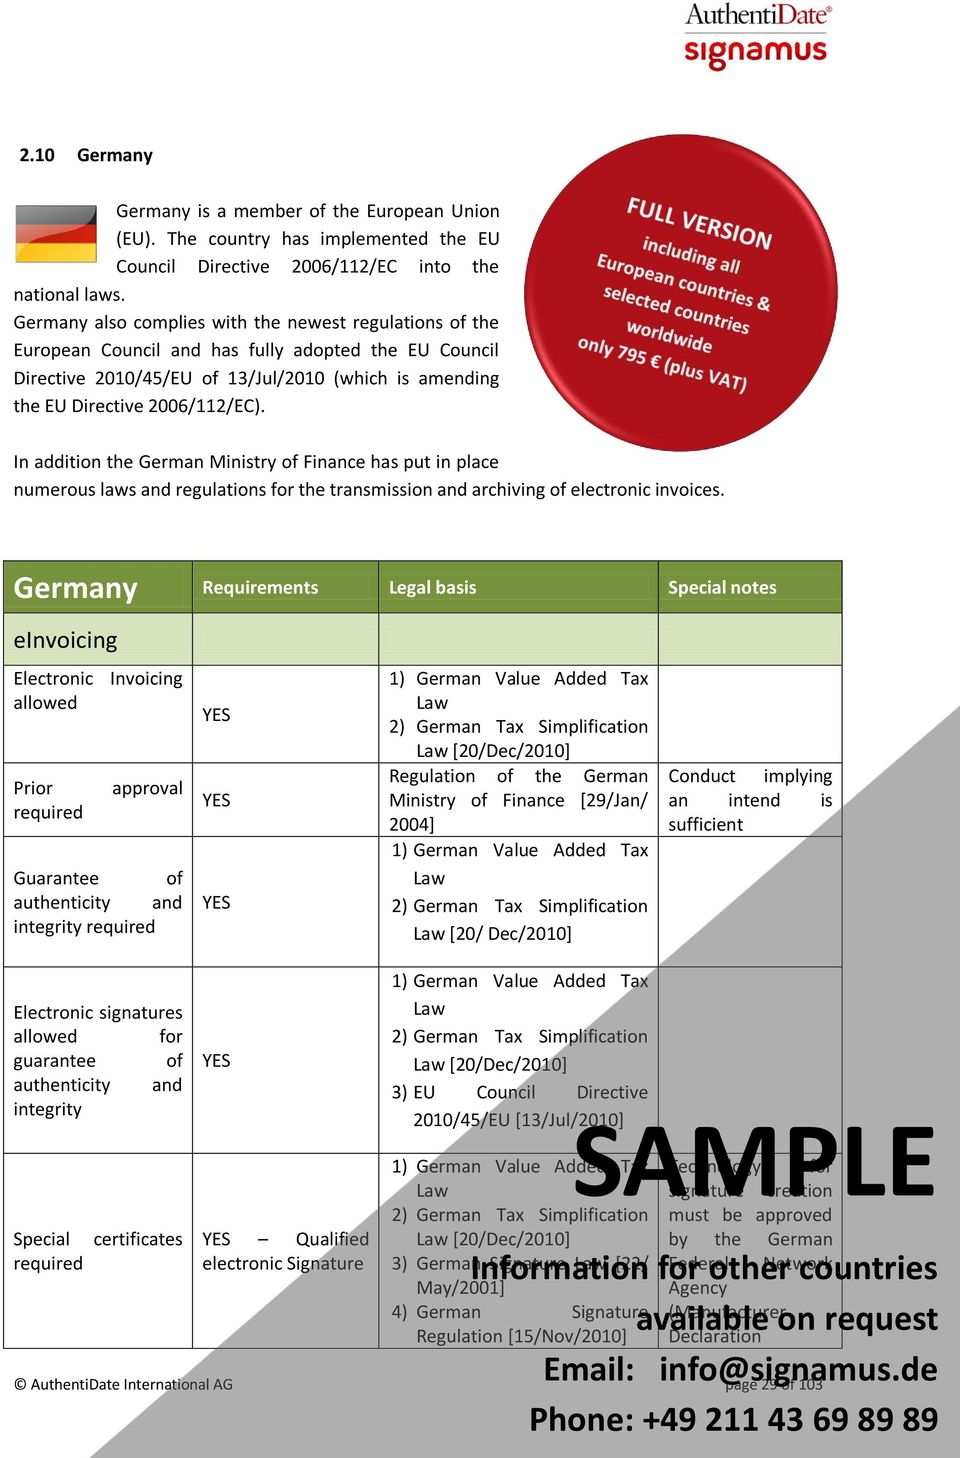 In addition the German Ministry of Finance has put in place numerous laws and regulations for the transmission and archiving of electronic invoices.